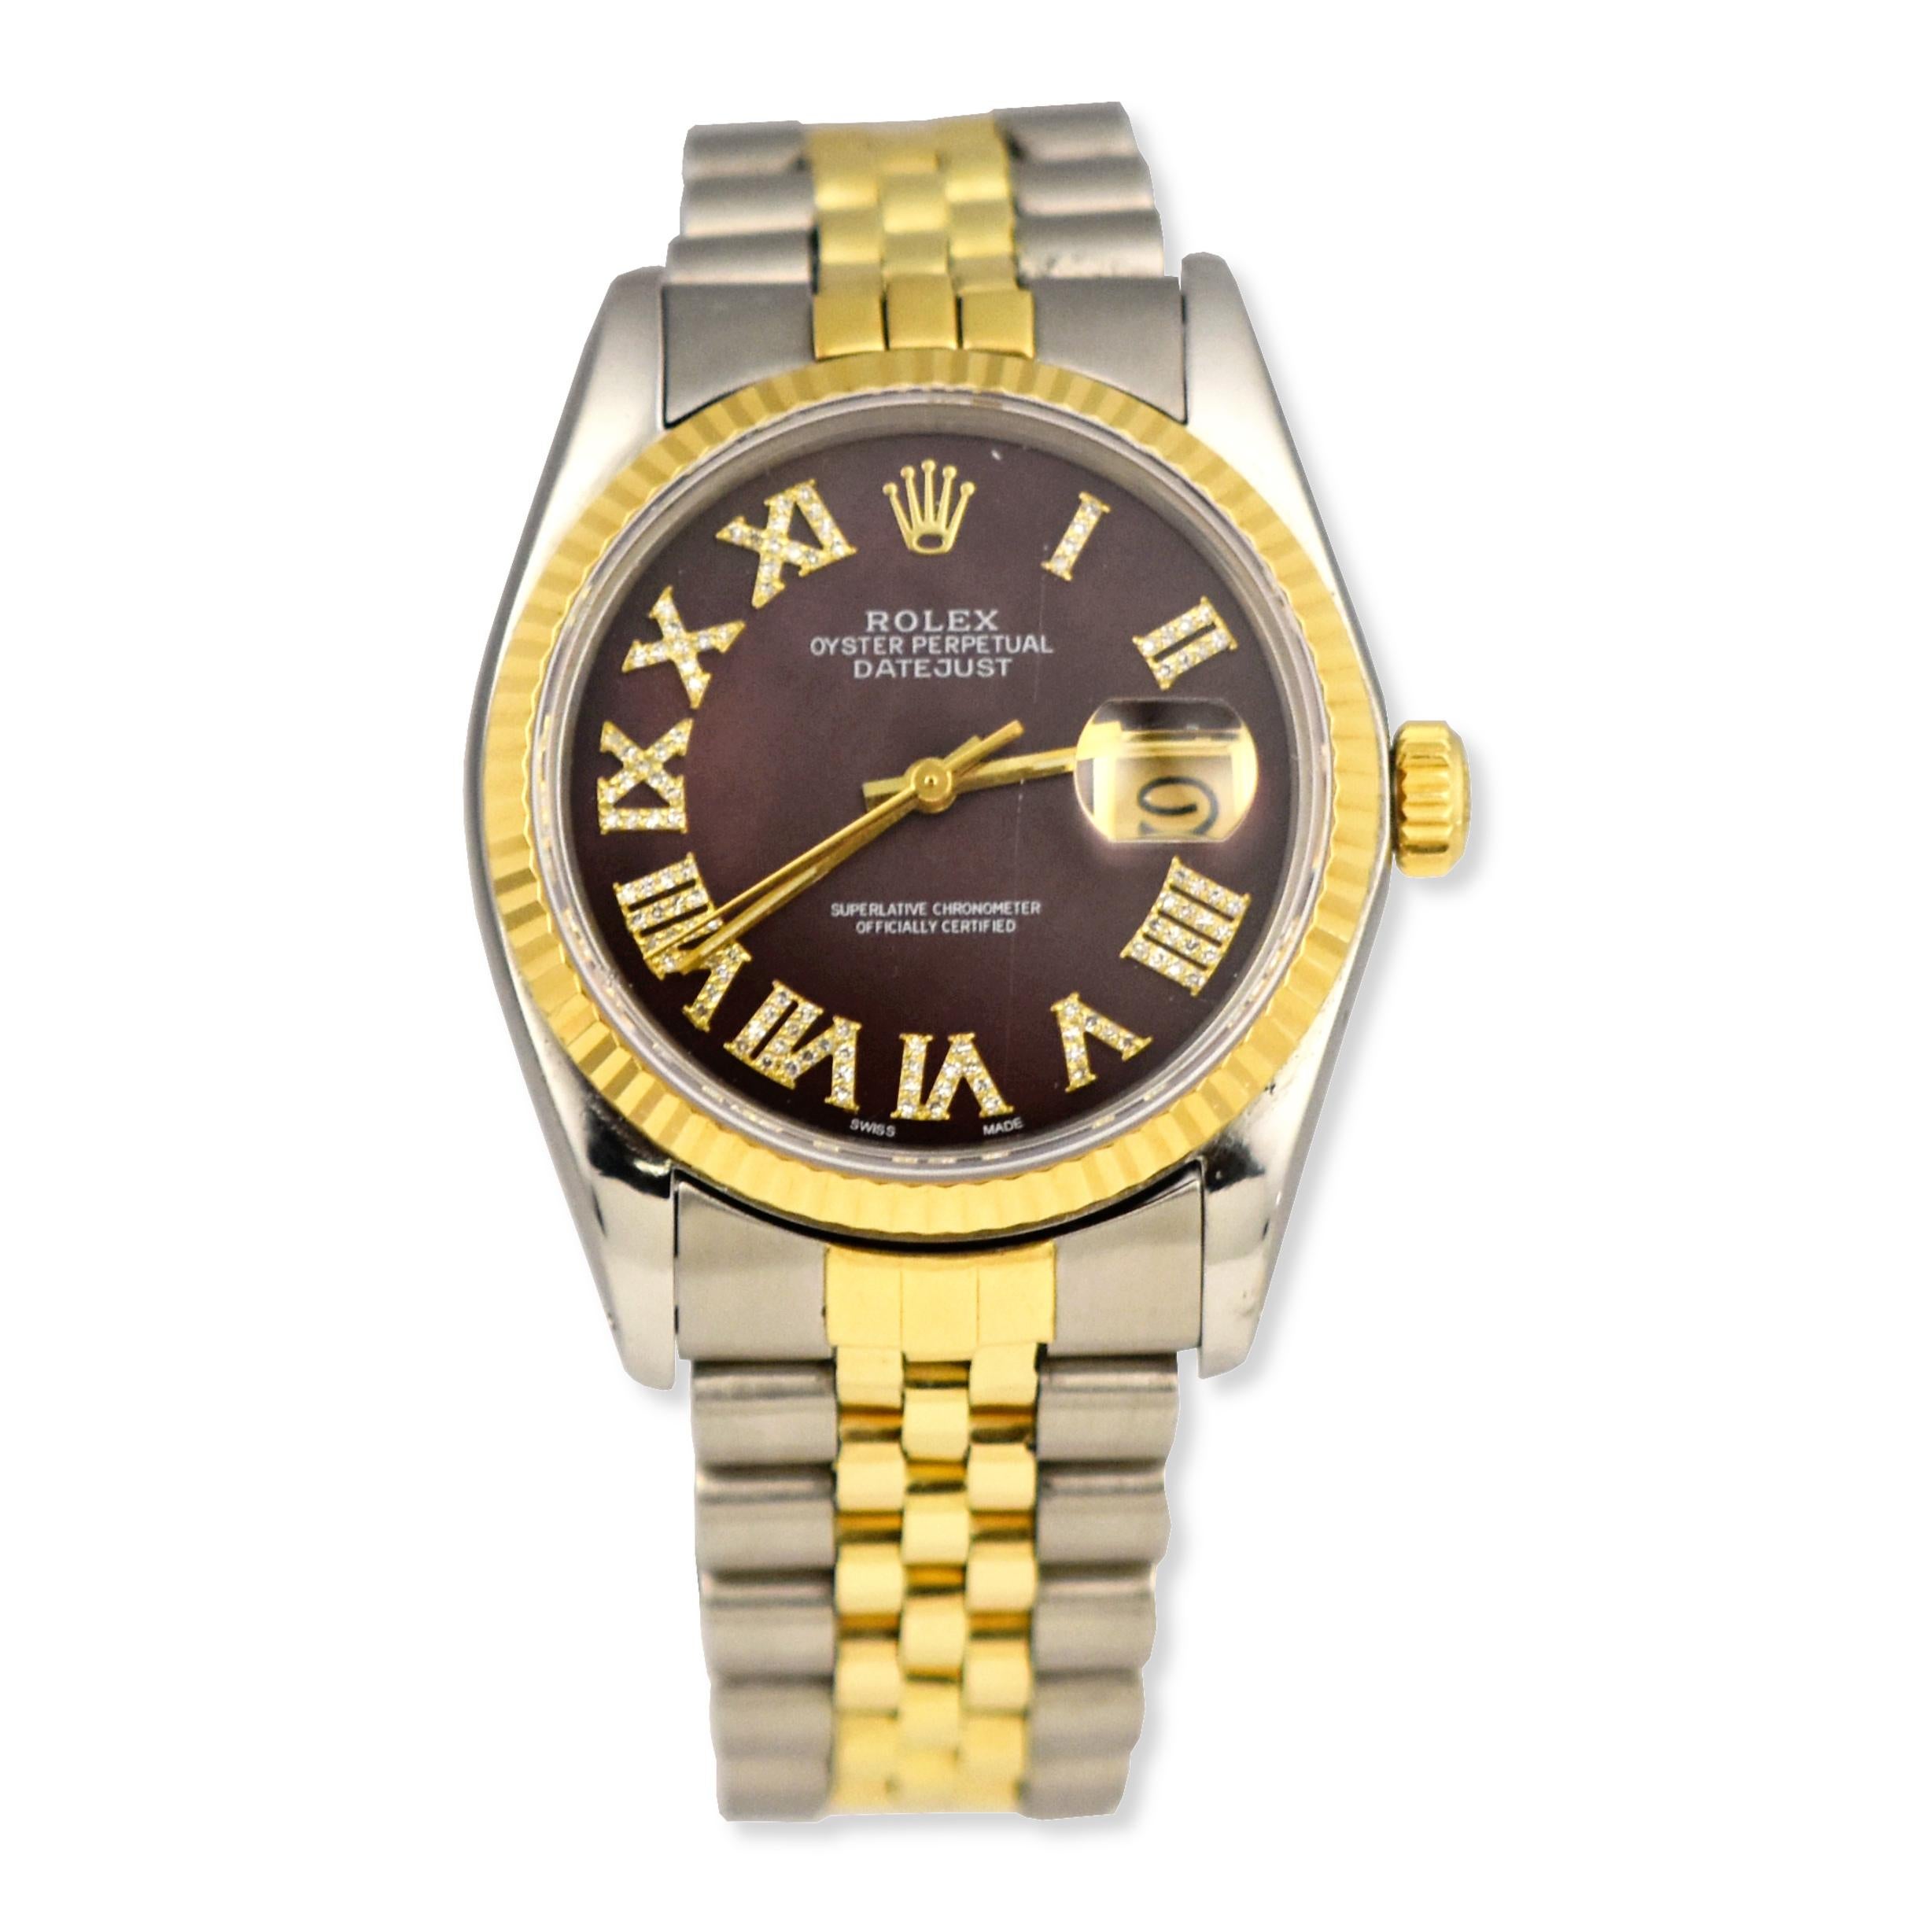 Model – Rolex Datejust
Model Reference - 16013
Movement – Rolex Automatic Movement
Bezel - 18K Yellow Gold Fluted Bezel
Dial Color– Burgundy
Hour Markers– Diamond Roman Numerals
Case Size – 36mm
Crystal - Scratch-resistant Sapphire Crystal 
Bracelet